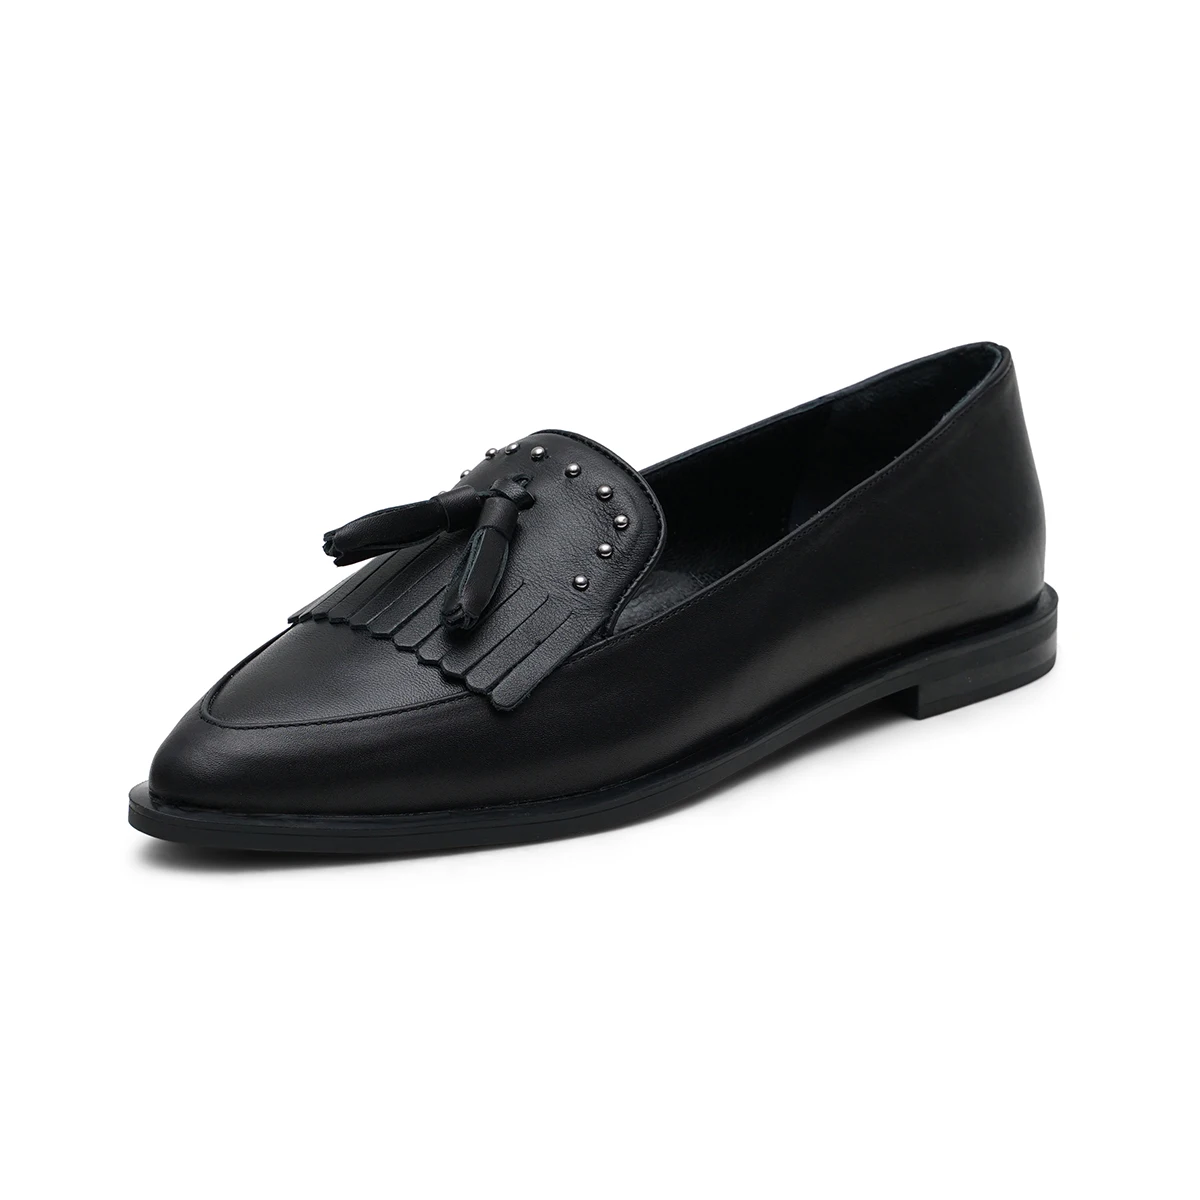 Mio Gusto Brand BRIANNA, Black Color, 1Cm Flat Heel, Comfortable New Fashion Women's Loafer Shoes